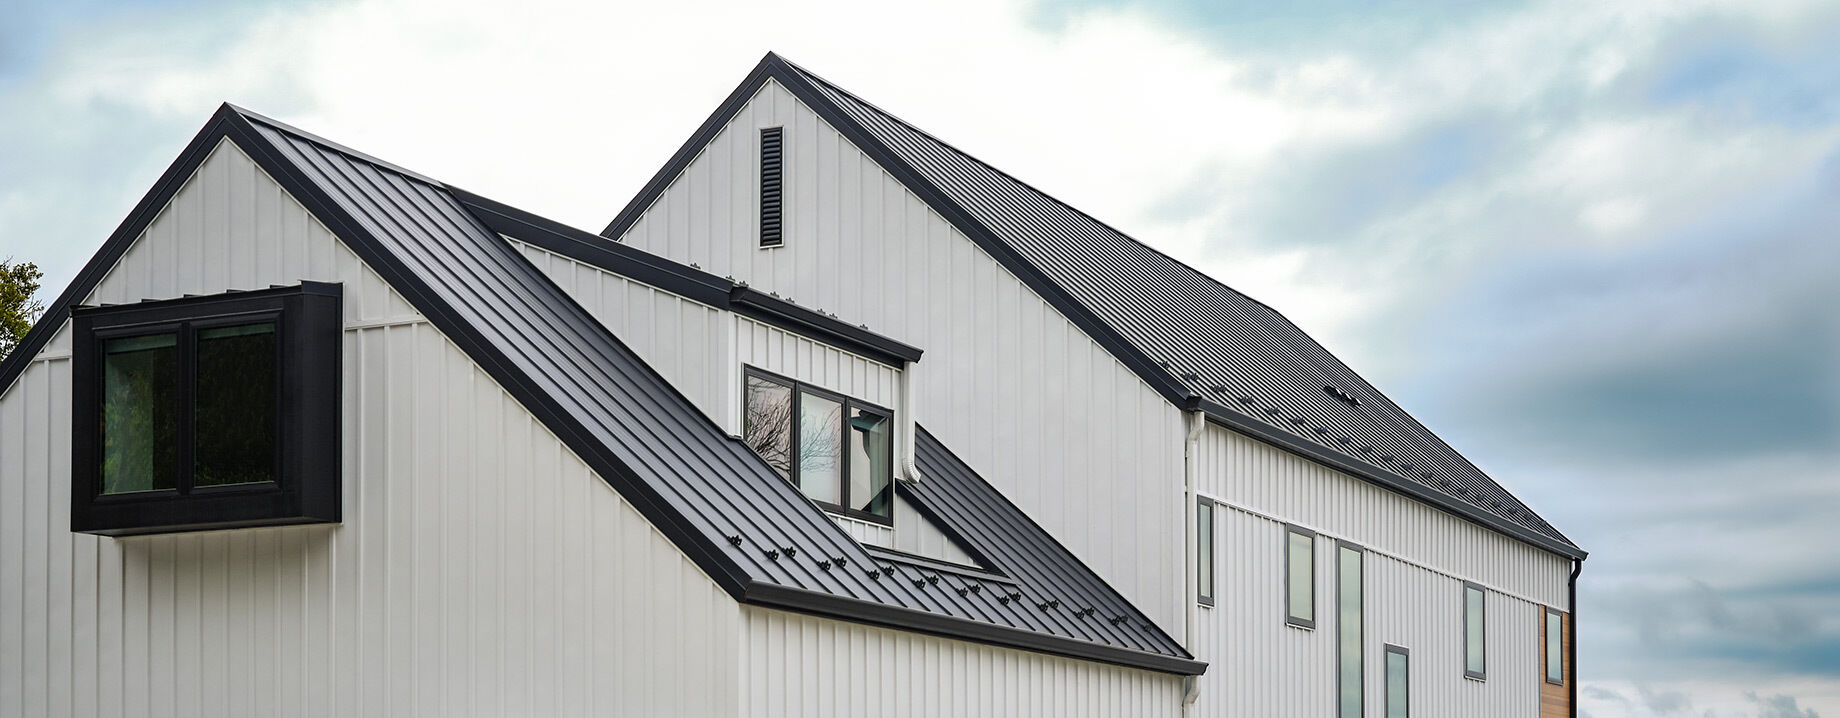 The Rising Trend of Board and Batten Siding: Introducing TruCedar Board and Batten Steel Siding